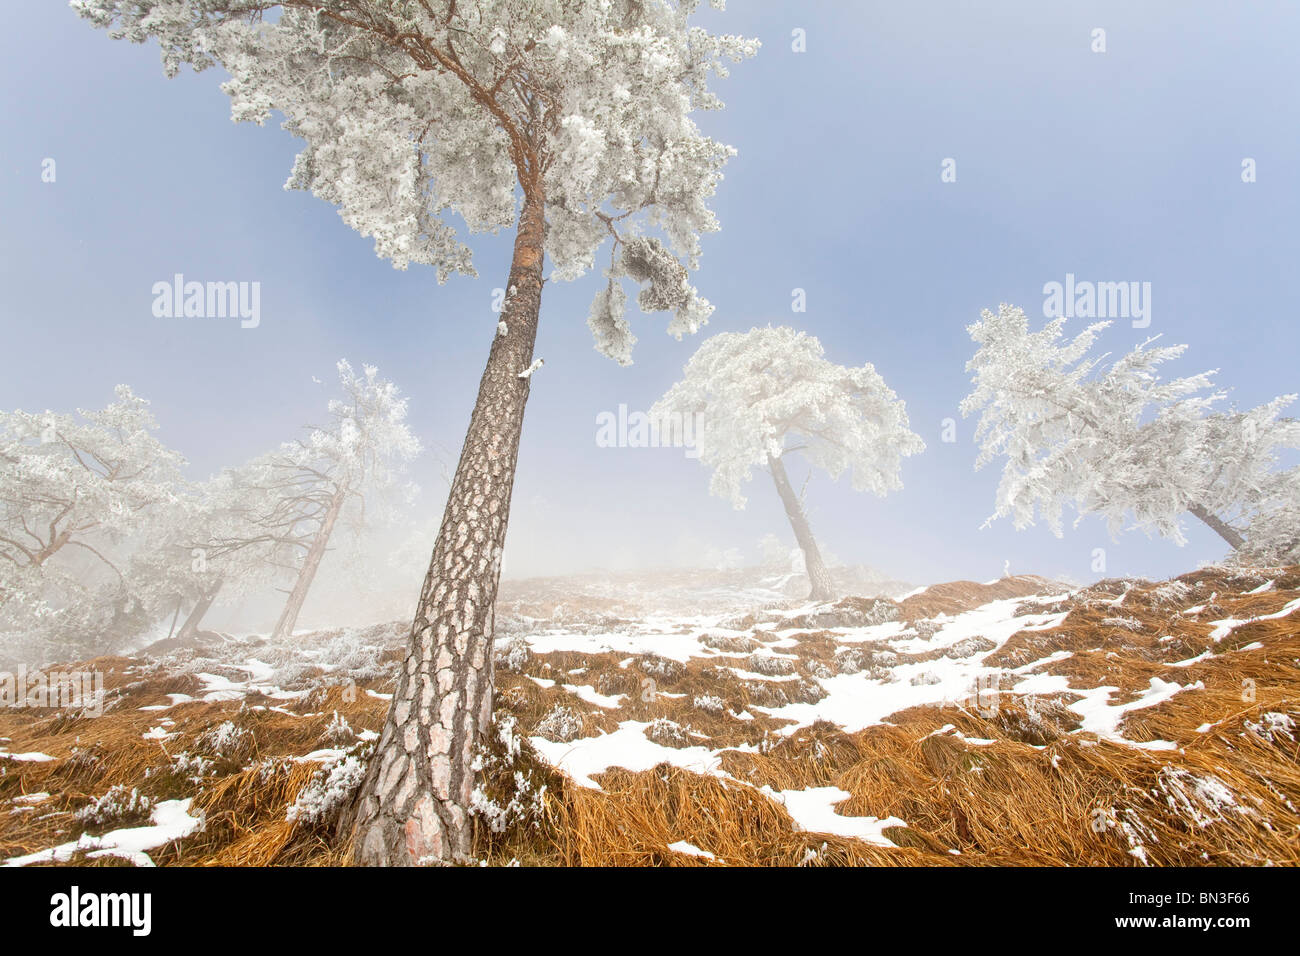 Snow-covered pine trees (Pinus sylvestris) at Untersberg mountain, Berchtesgaden, Germany, low angle view Stock Photo